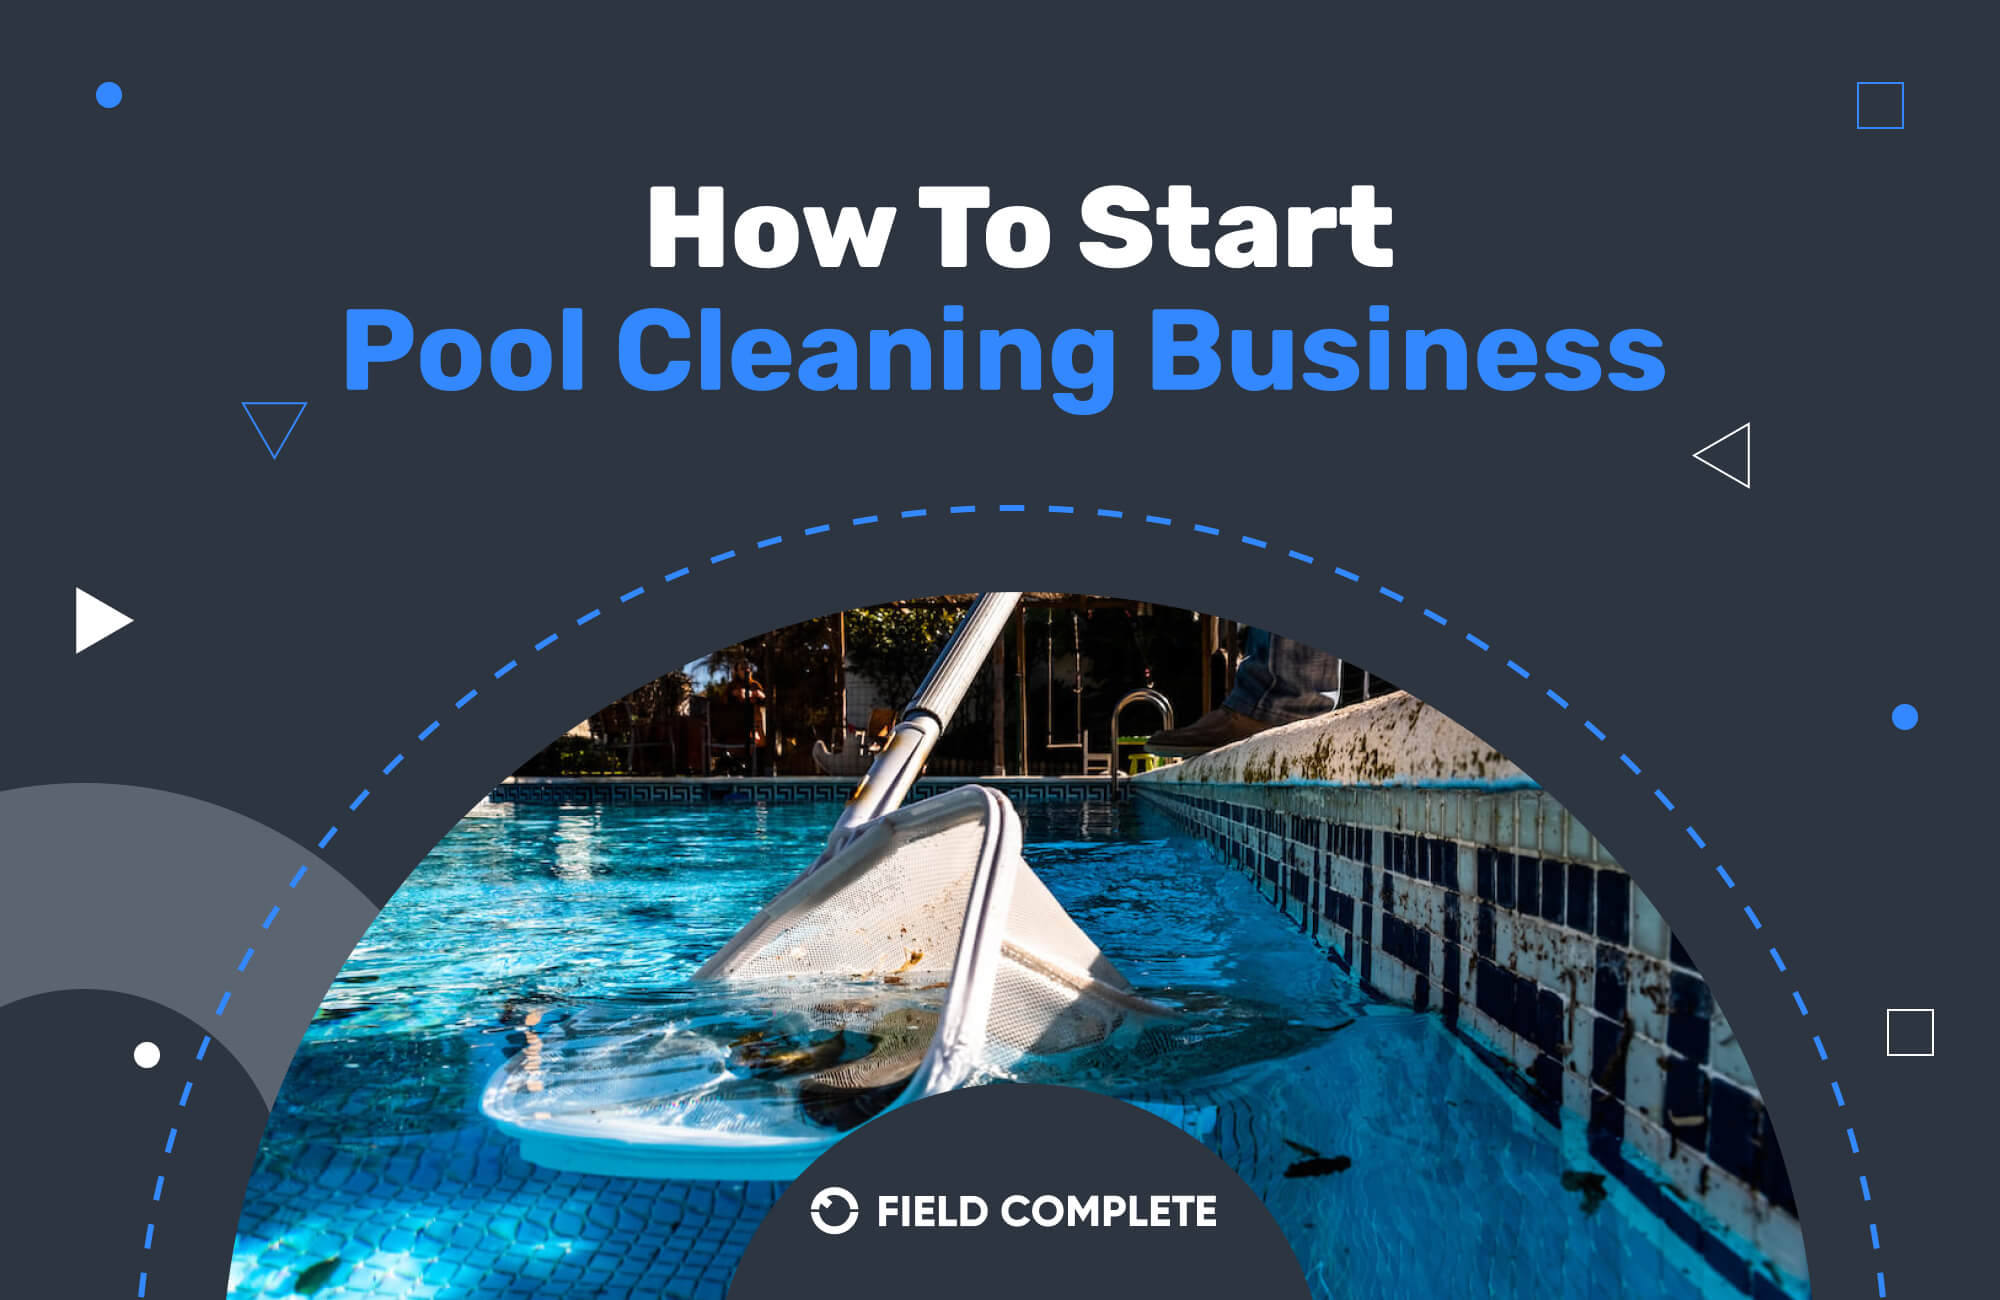 How To Start Pool Cleaning Business?